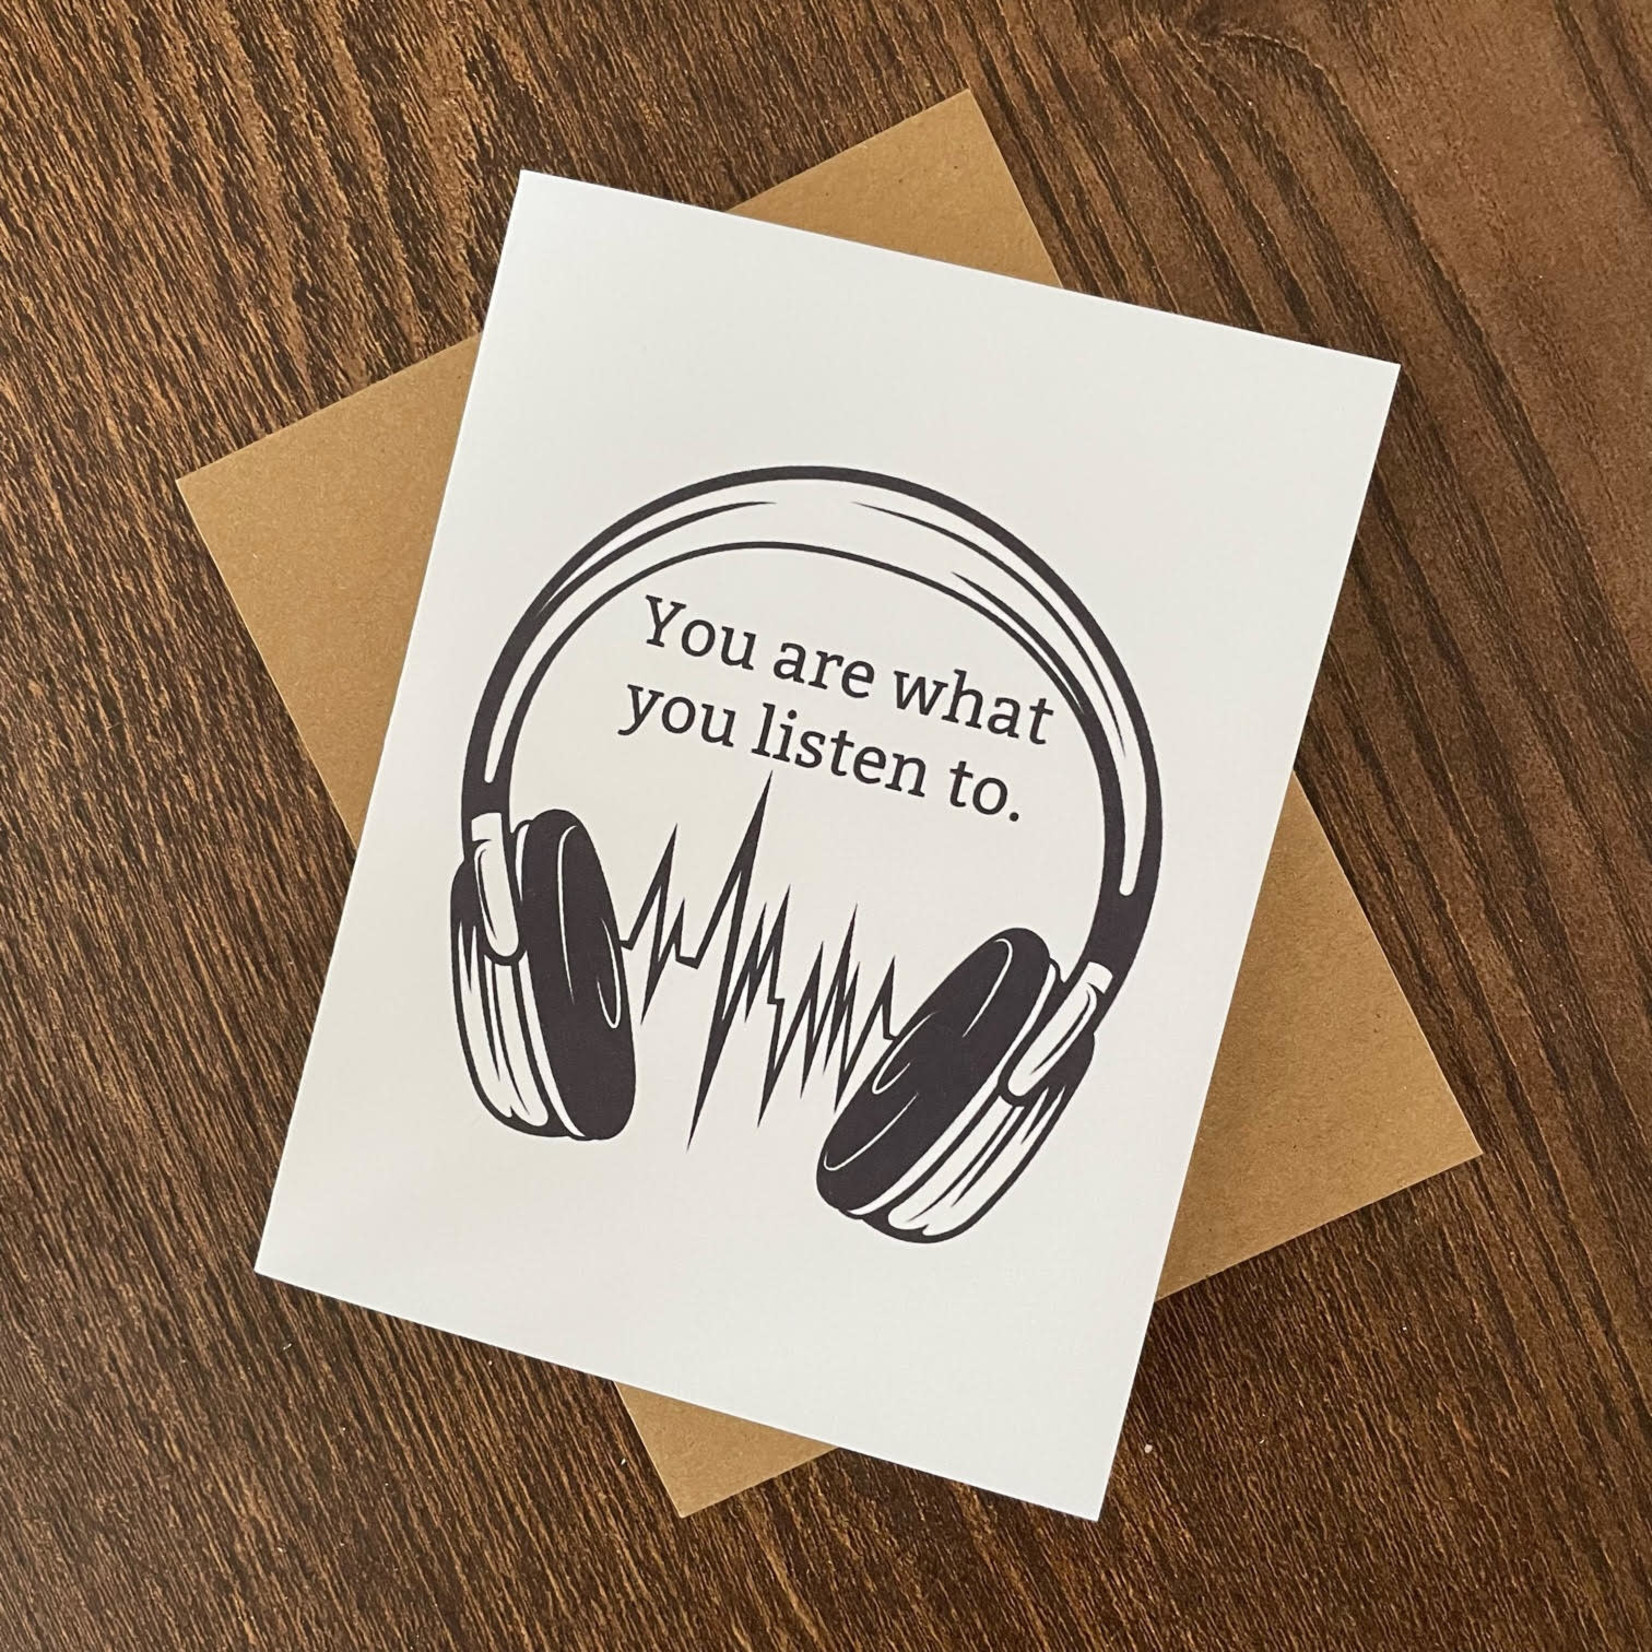 Greeting Card - You Are What You Listen To.